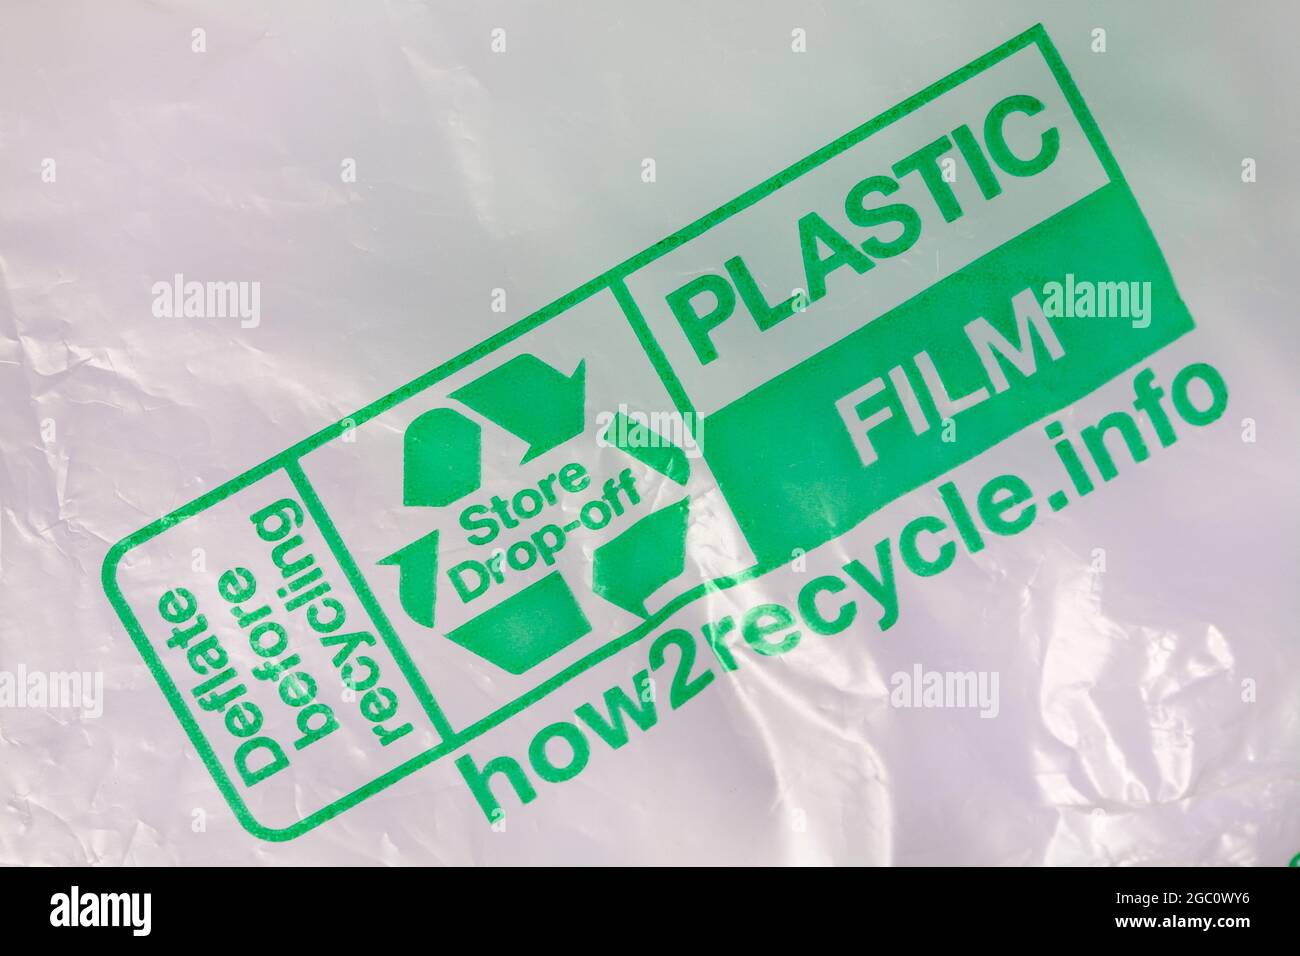 deflate before recycling with recycle logo recycling logo Mobius Loop symbol store drop off on plastic film packaging Stock Photo